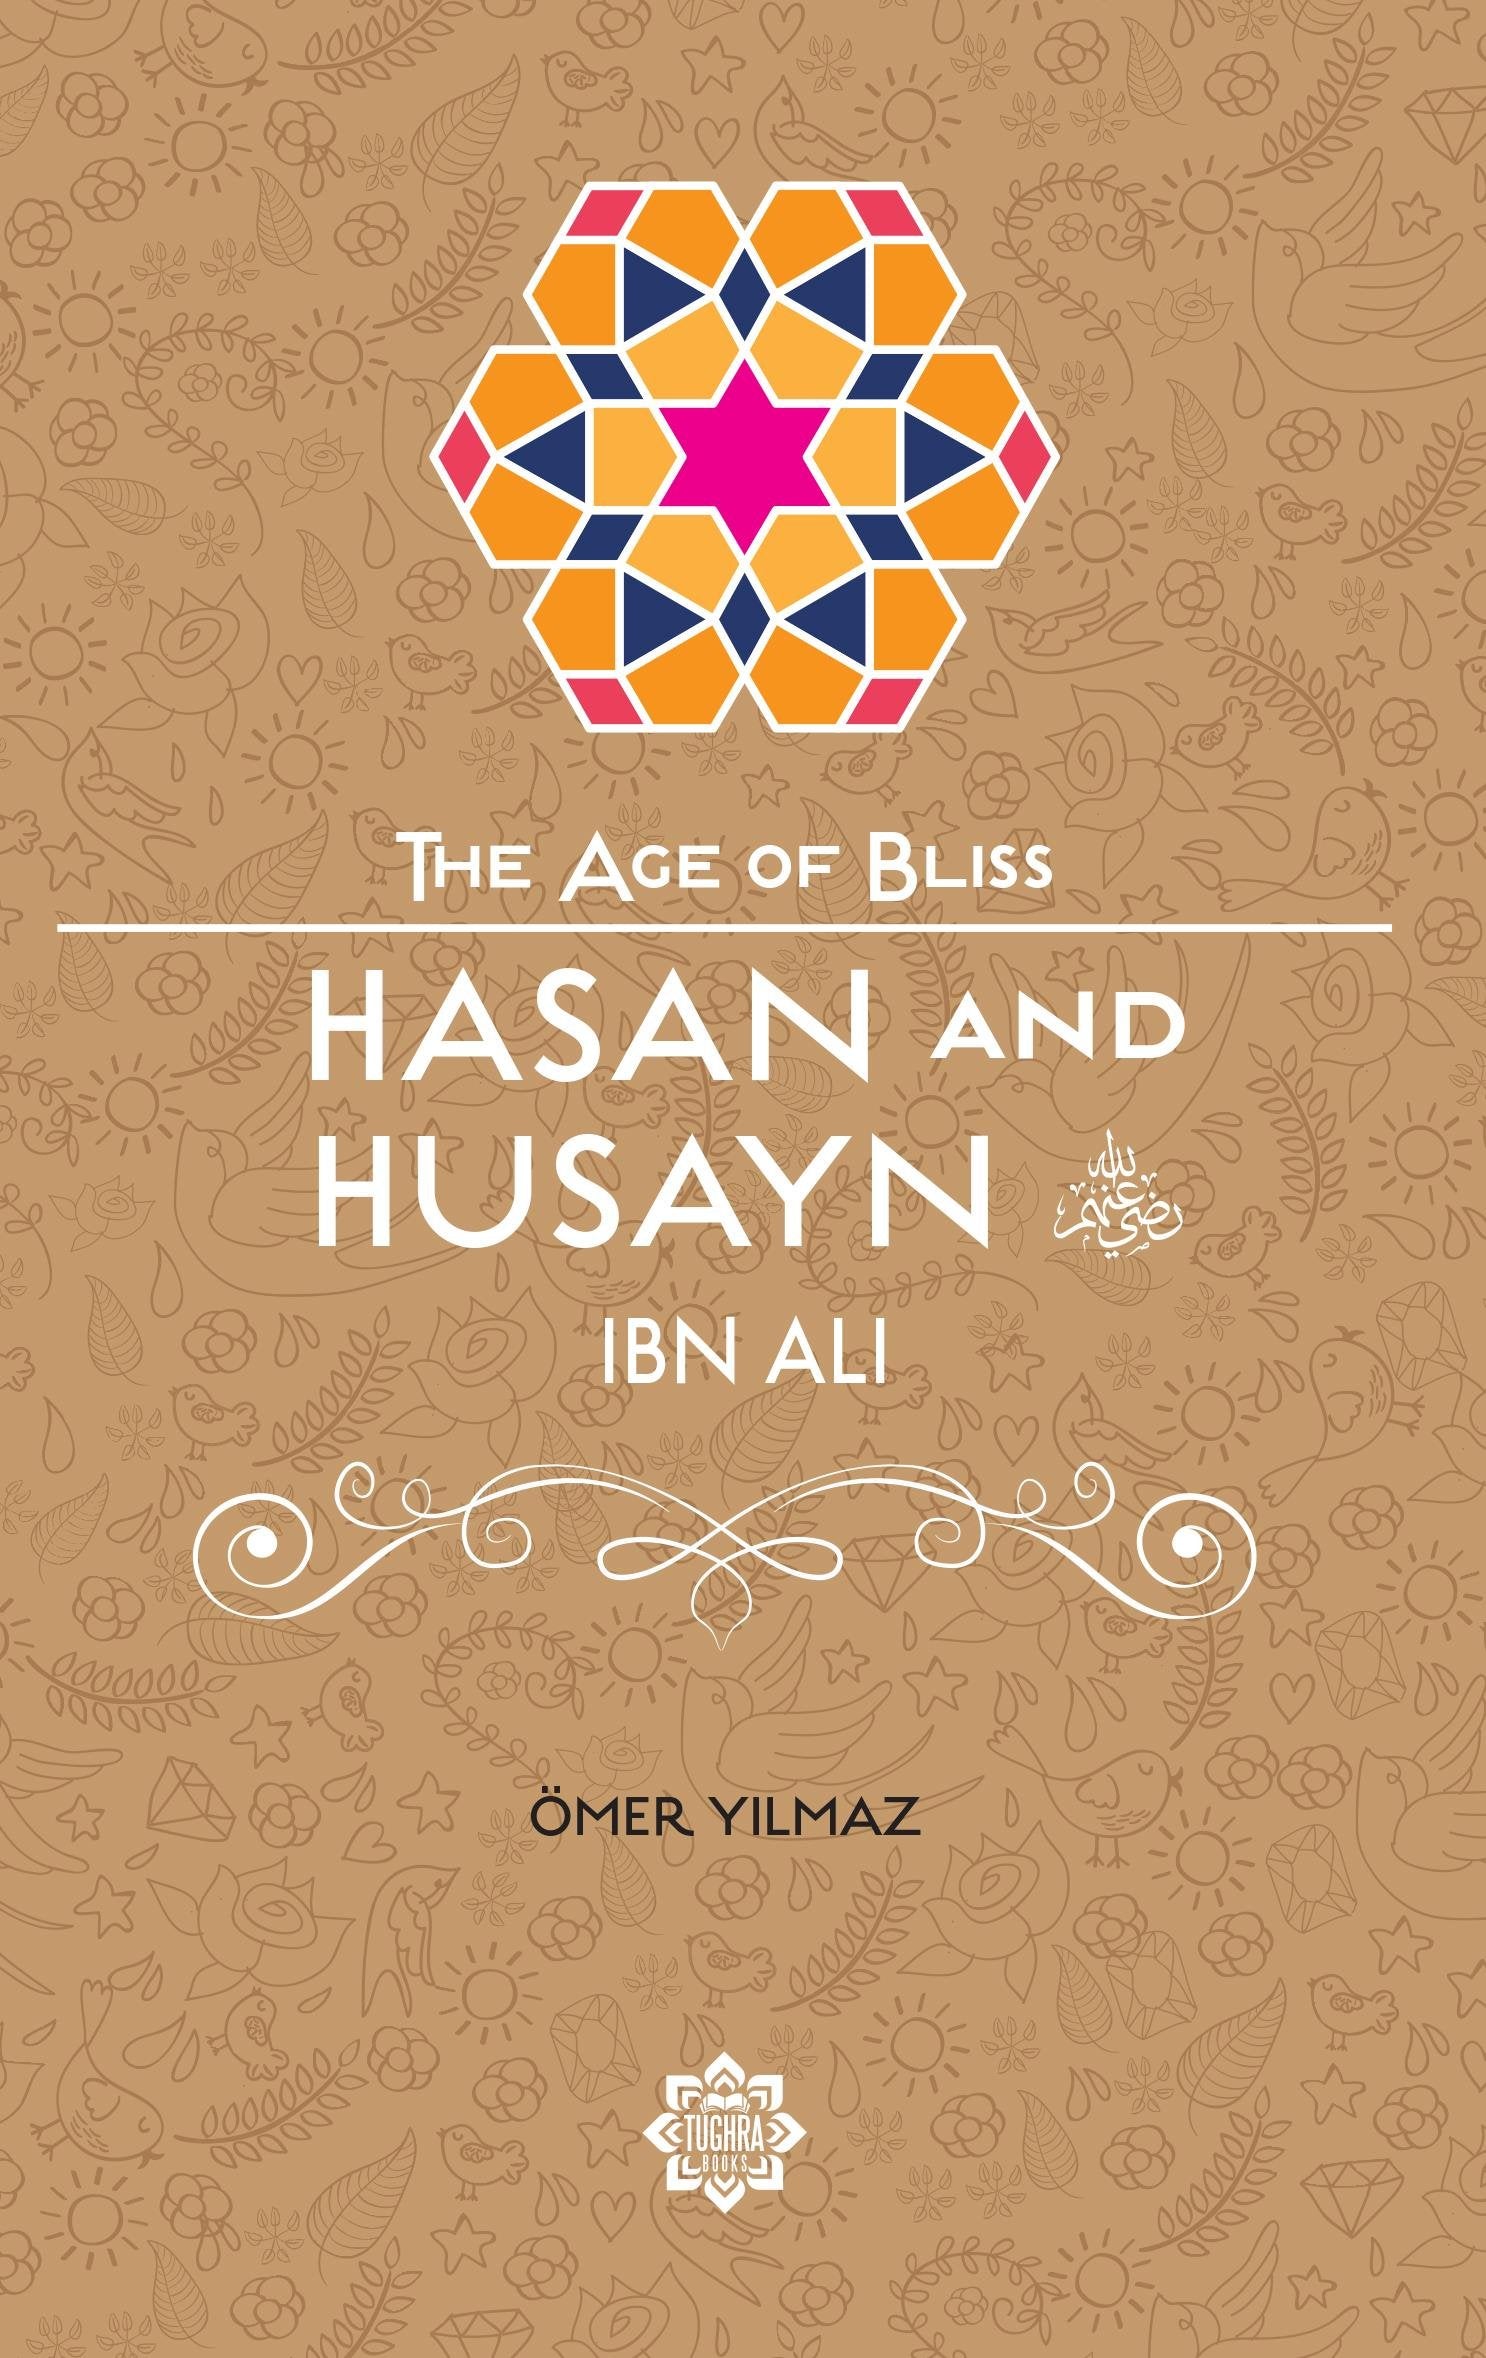 The Age of Bliss: Hasan and Husayn